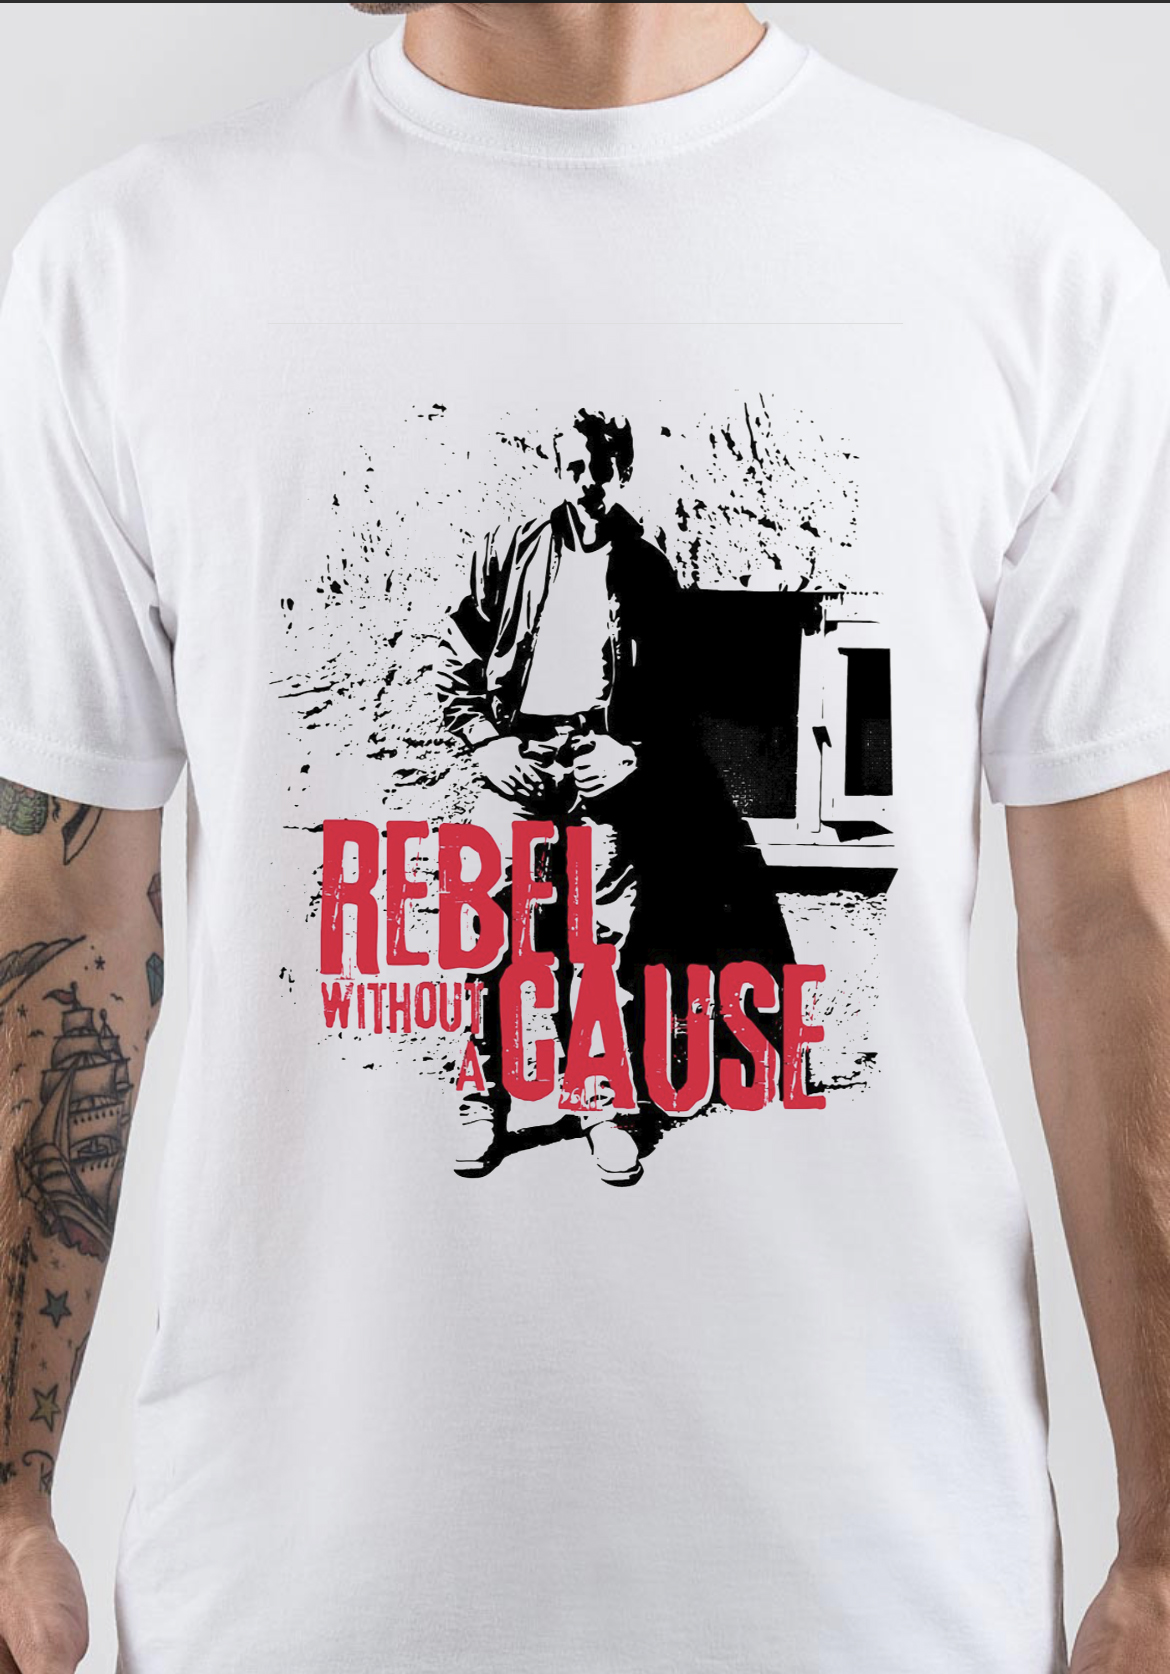 Rebel with a cause Prison art and fashion makes it way into the mainstream   Boulder Daily Camera